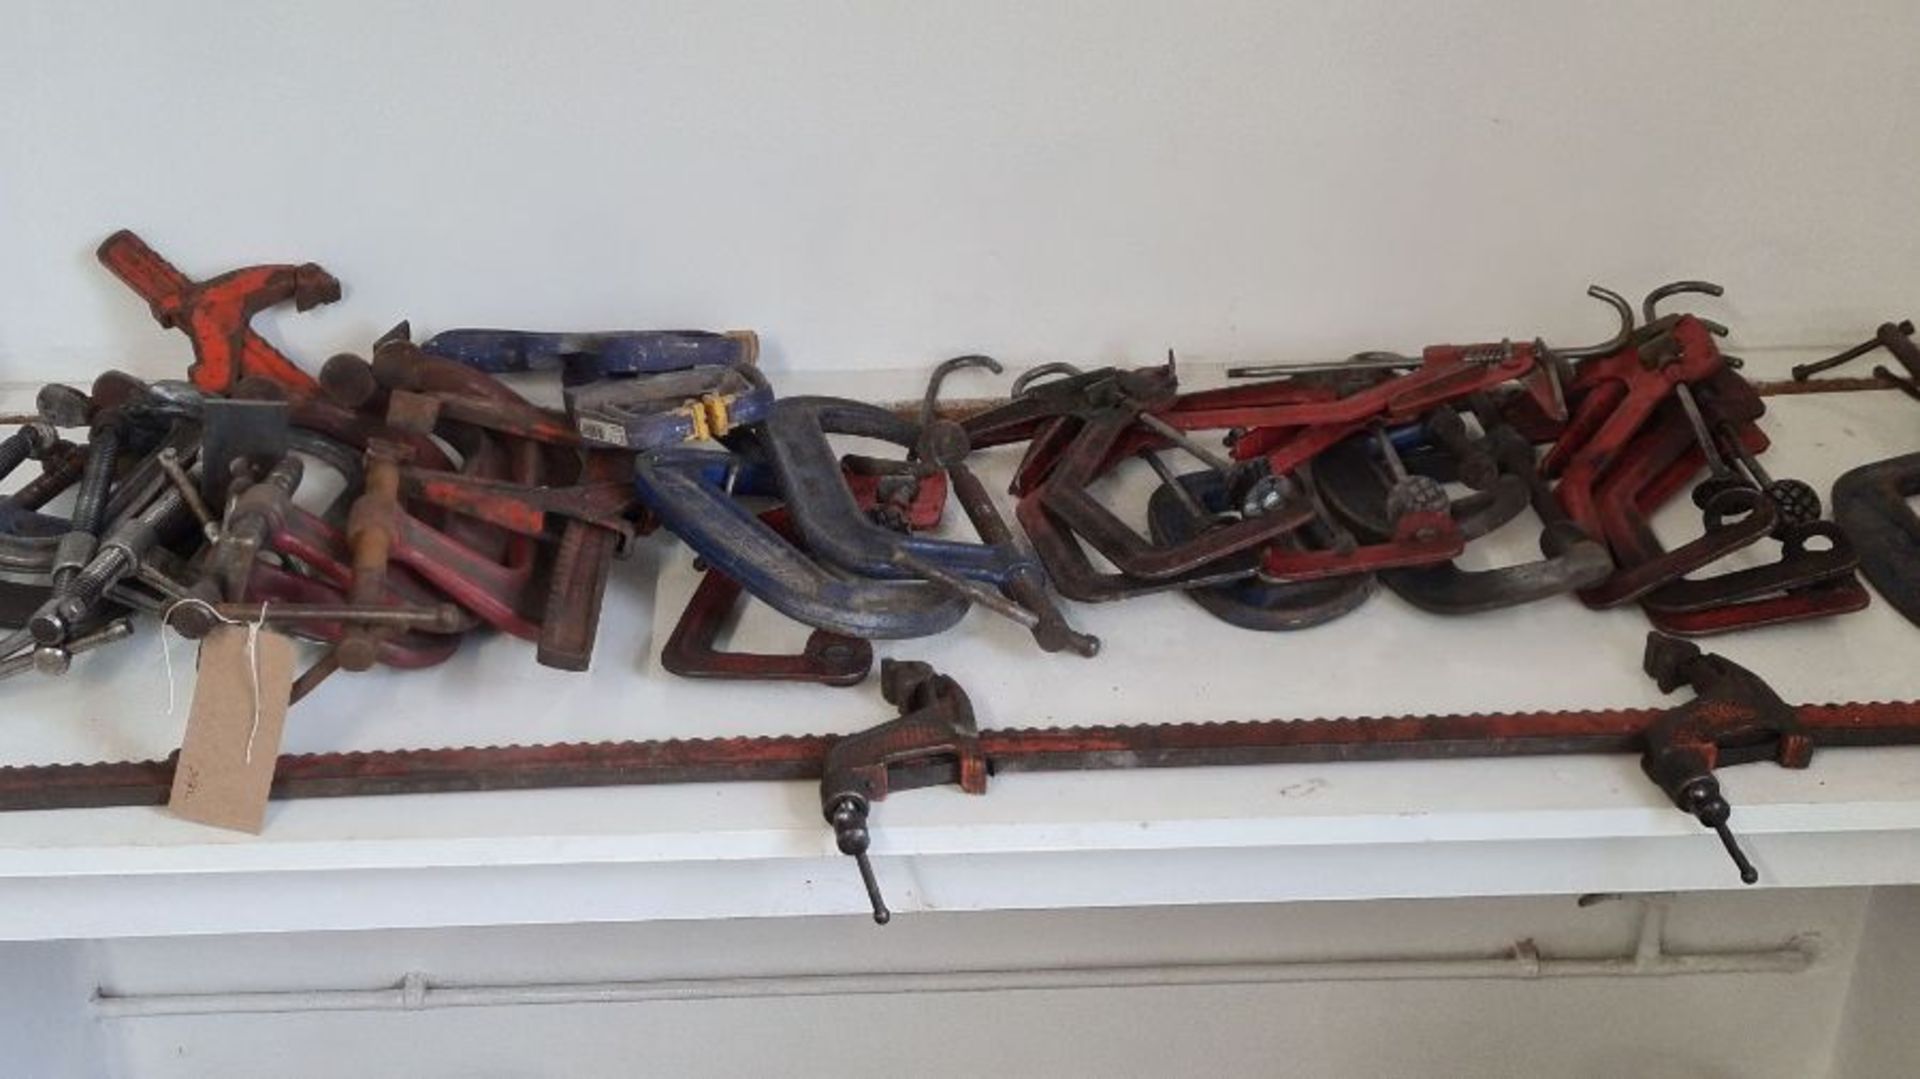 Quantity of Record Carver Python and other G clamps and engineering clamps.